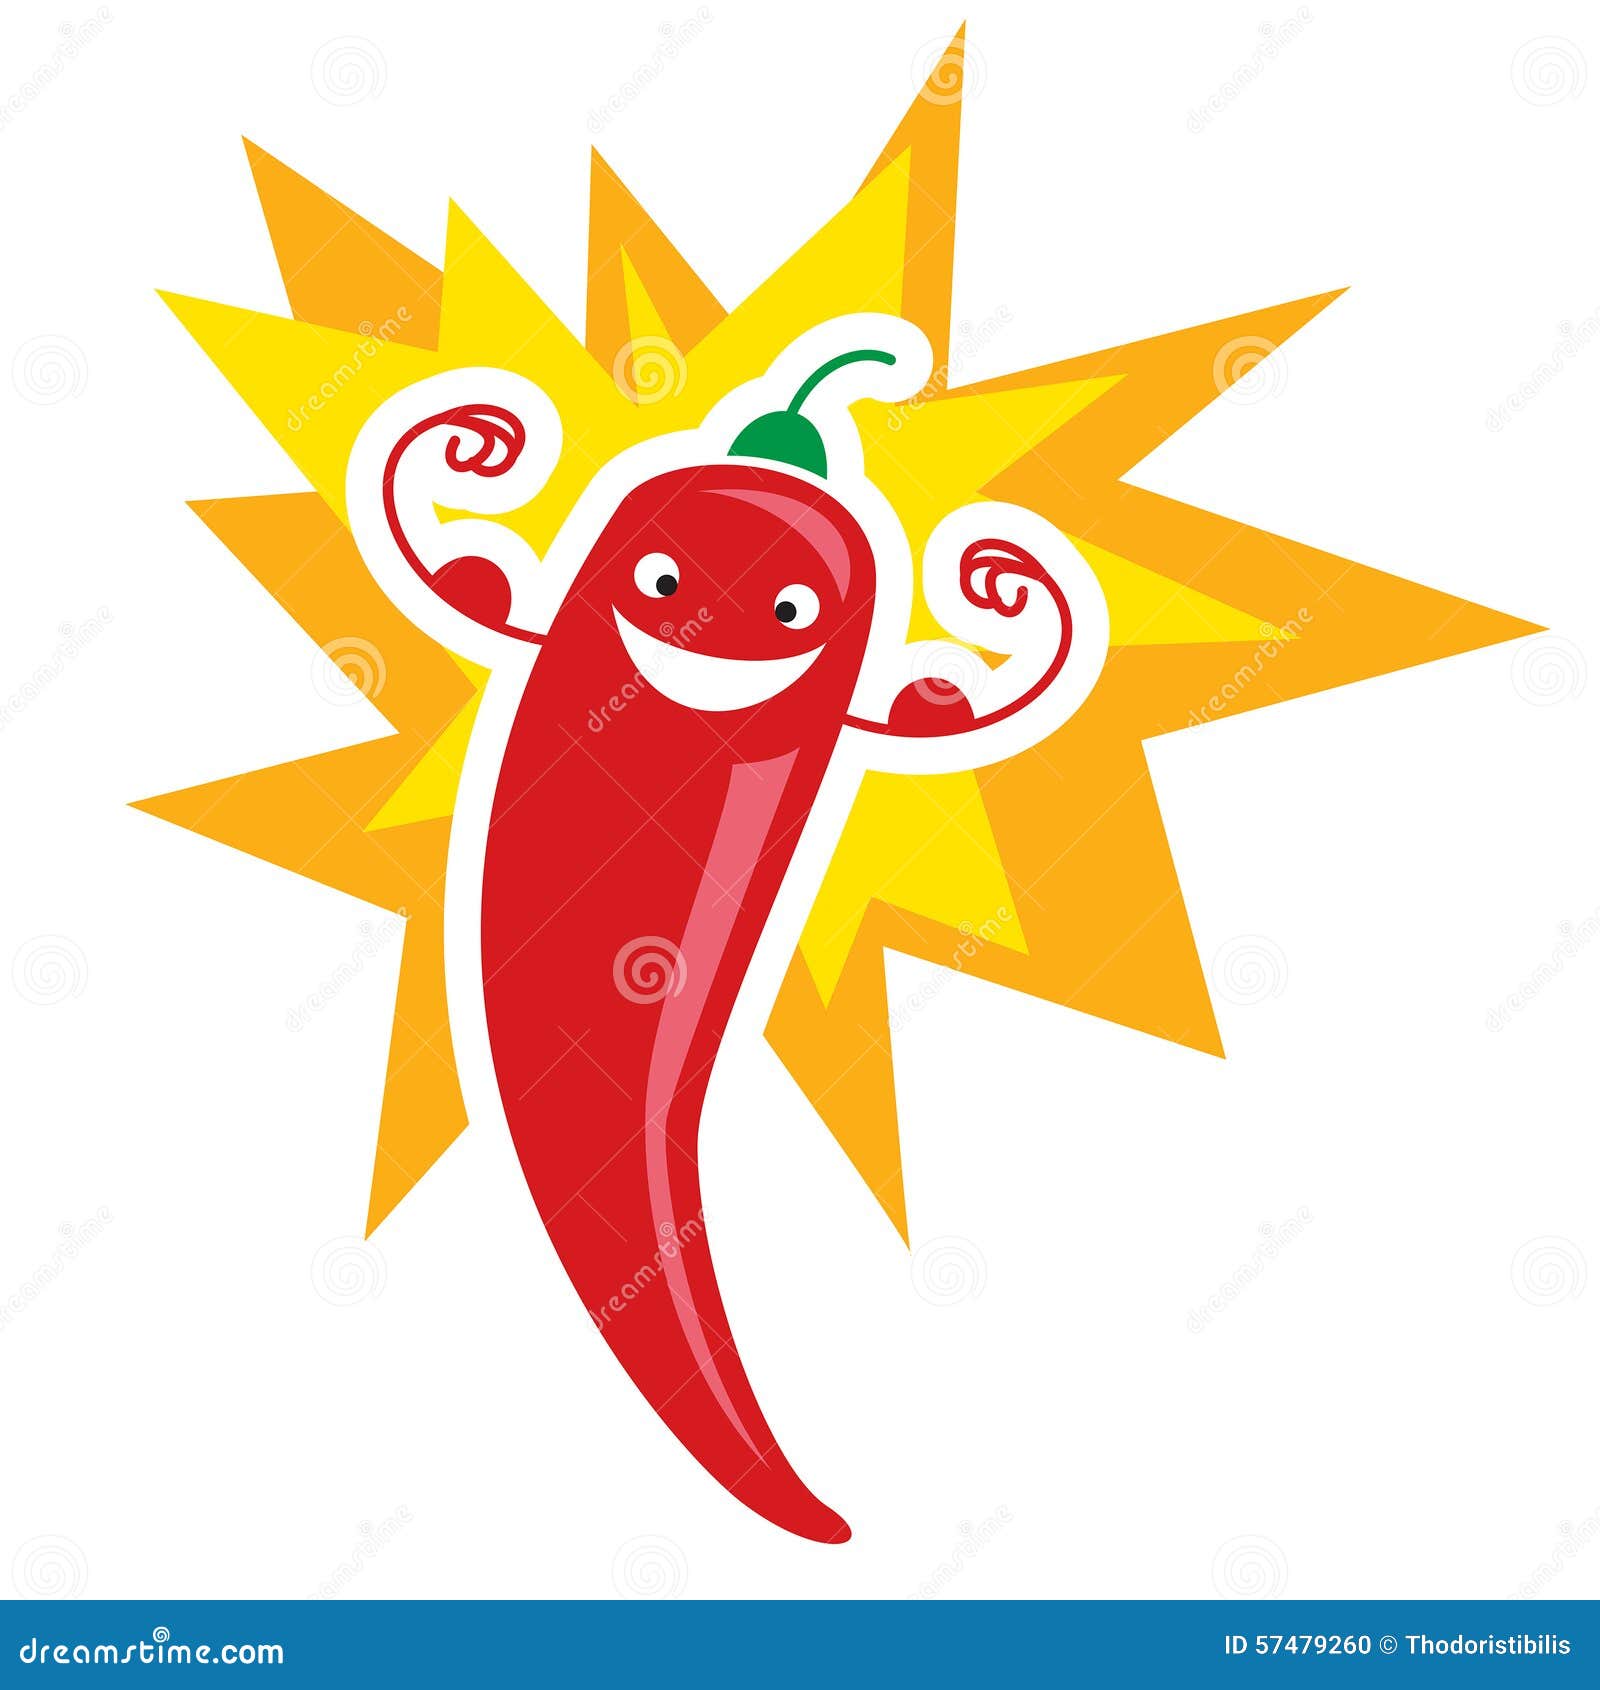 red devious extremely hot cartoon chili pepper character on fire